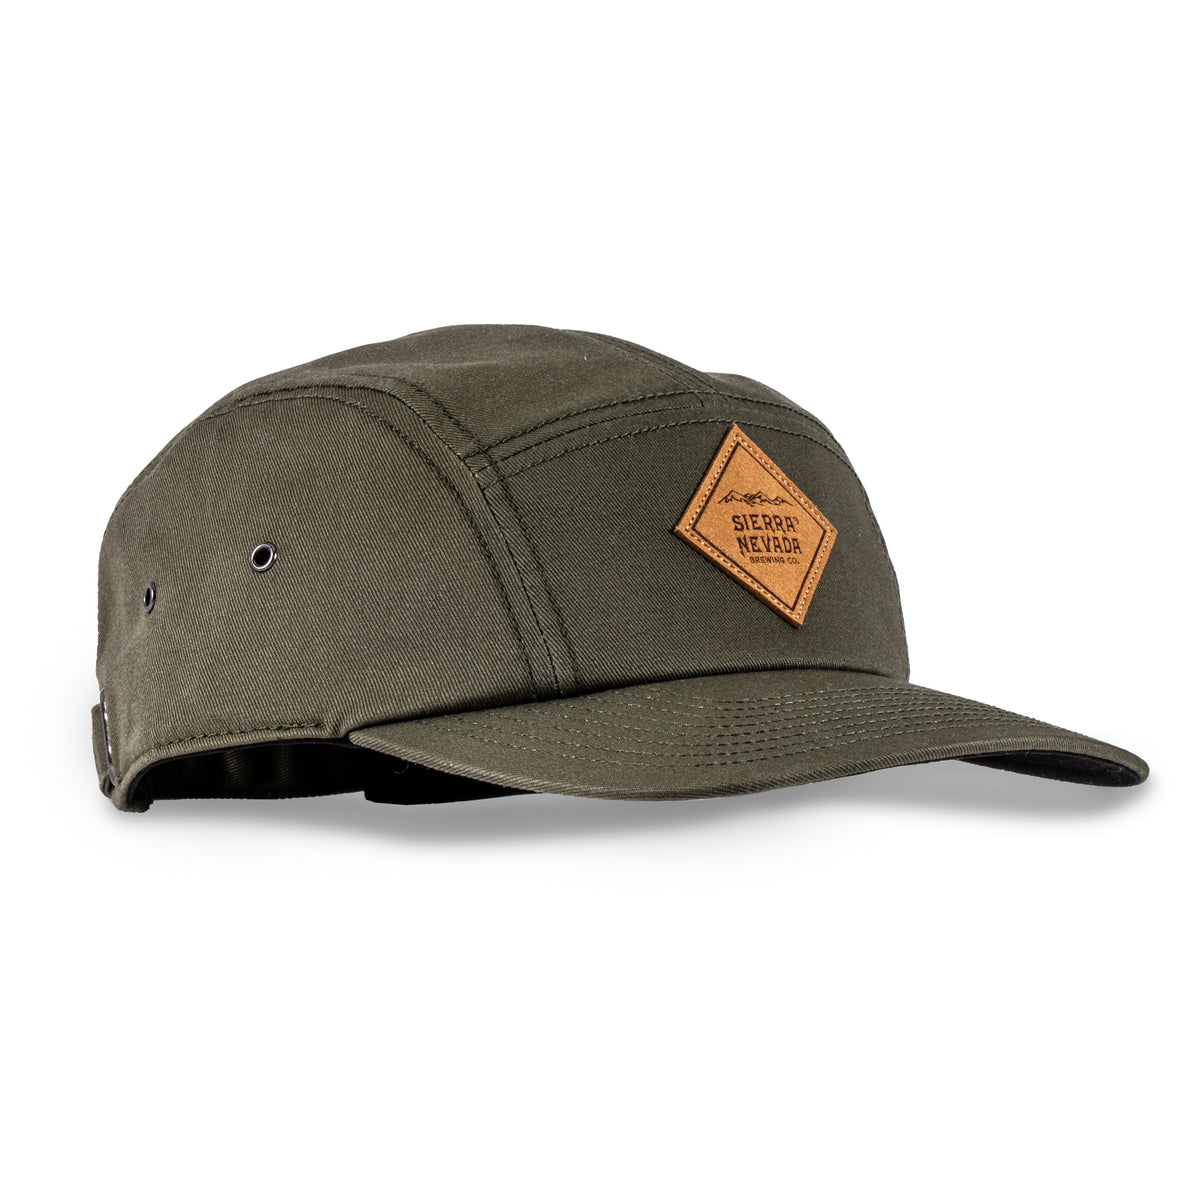 Front angled view of the Sierra Nevada diamond patch green camper hat